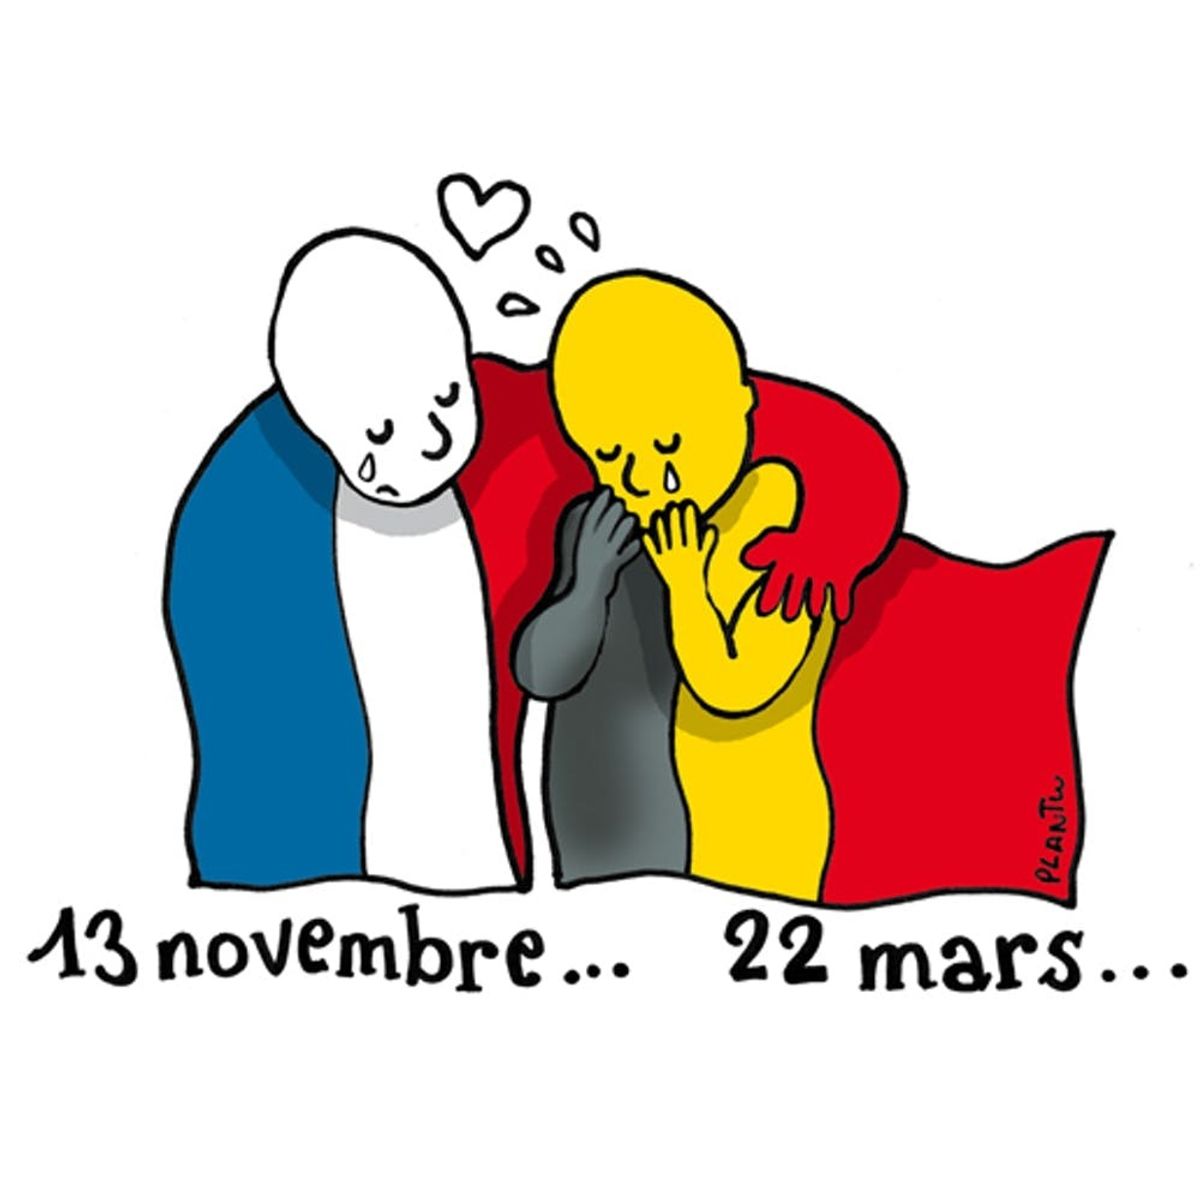 The Most Moving Brussels Attacks Art Tributes on Social Media